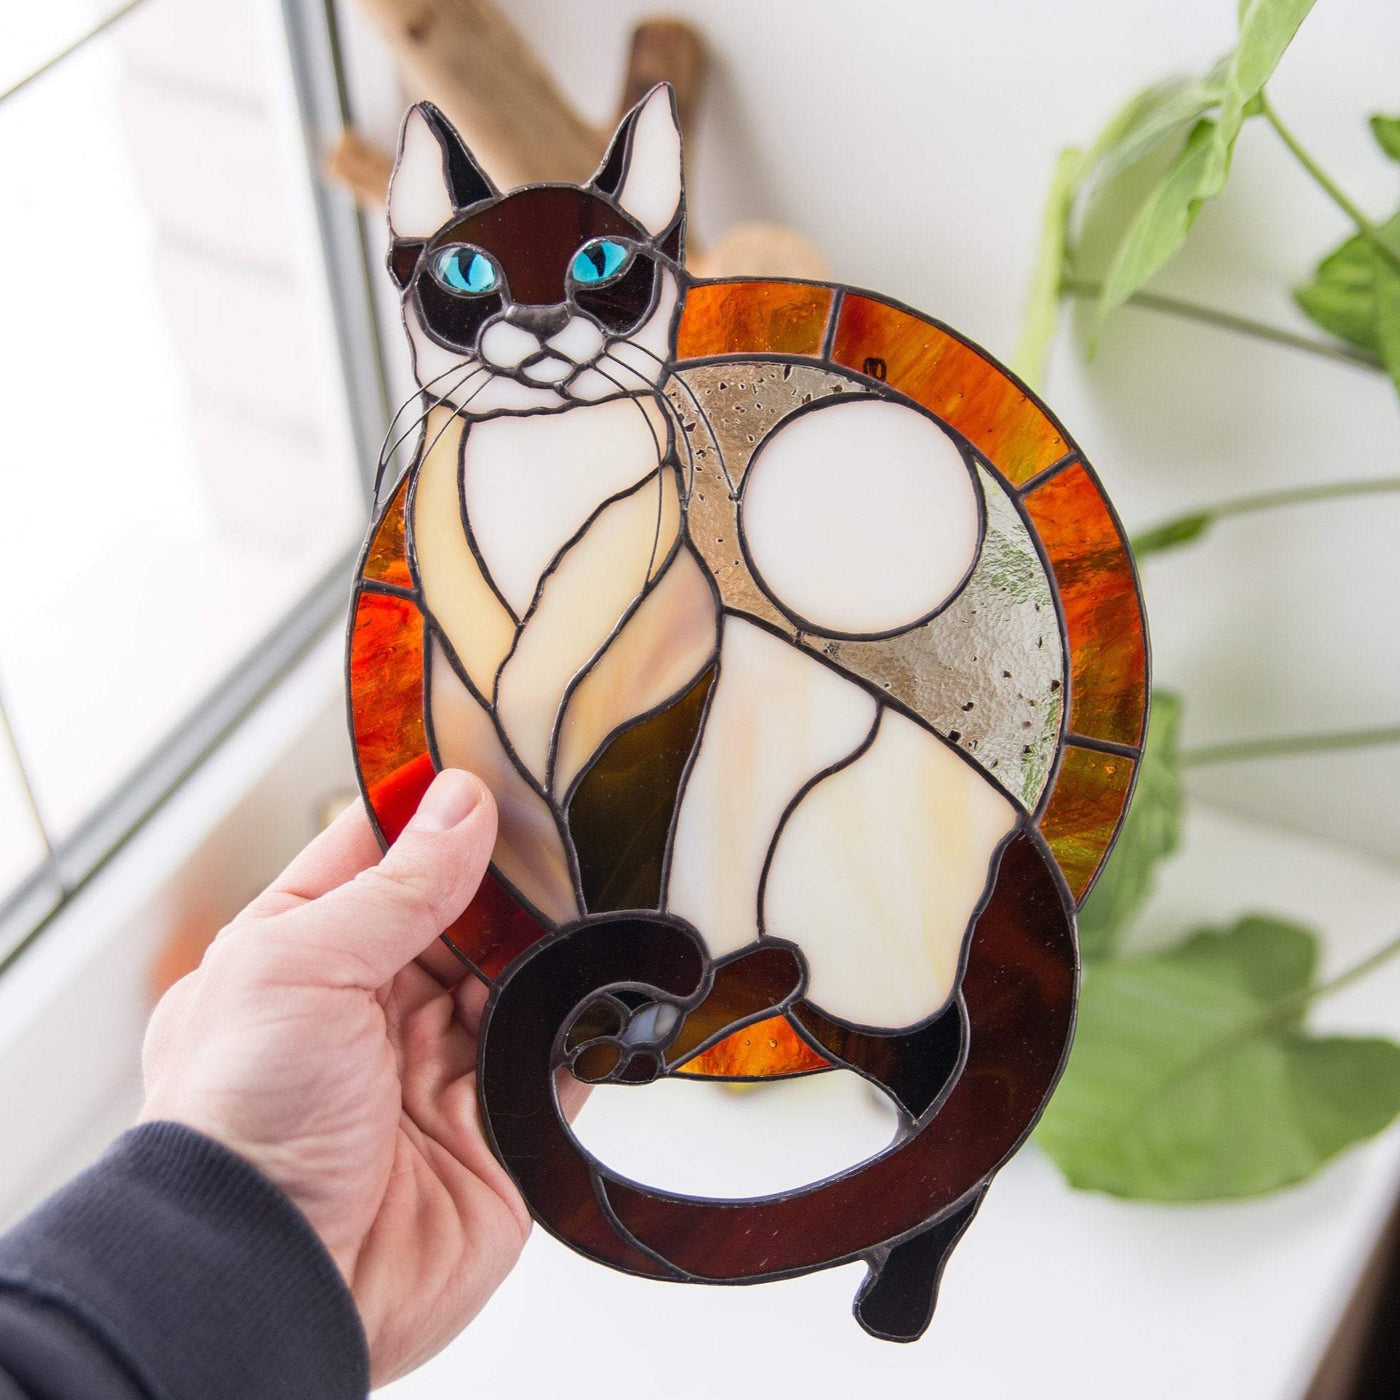 Round stained glass Siamese cat portrait window hanging made from photo